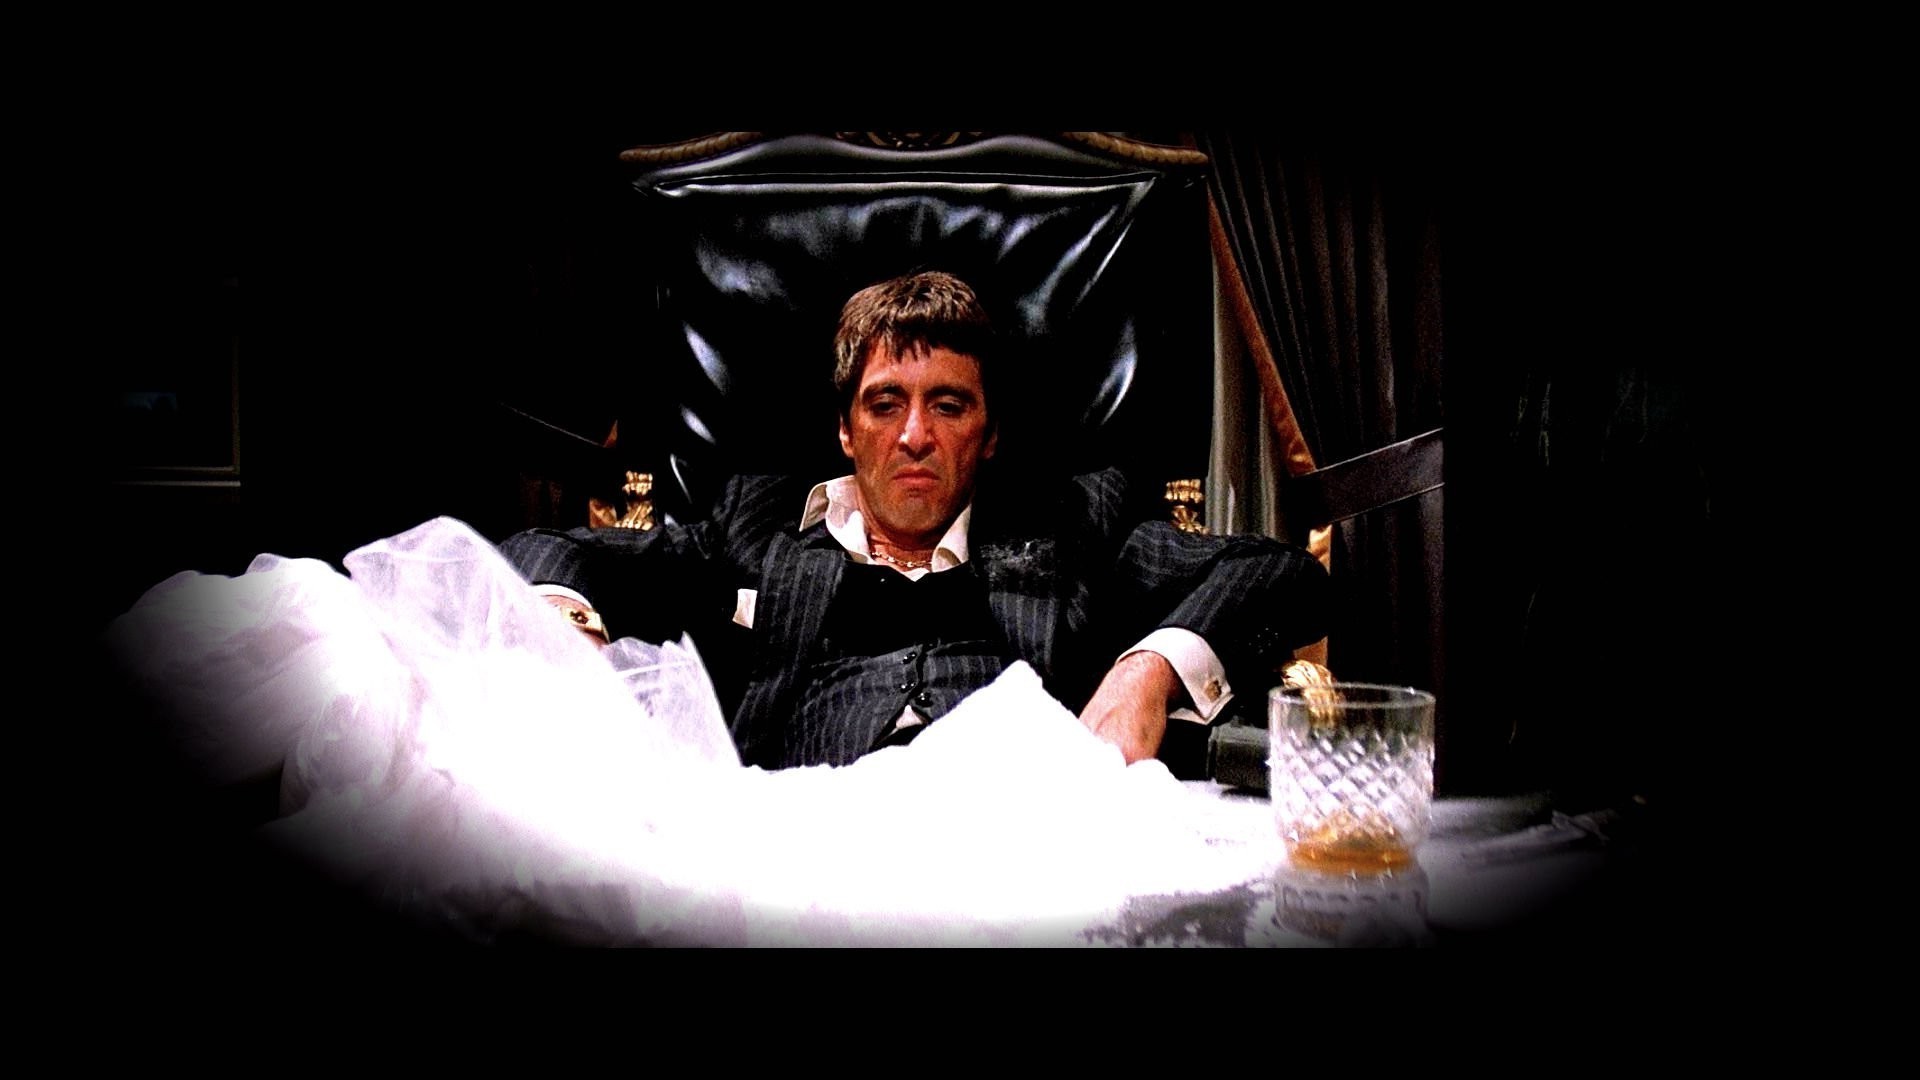 1920x1080 2560x1600 Movies Wallpaper. Download the following Scarface Wallpaper HD .